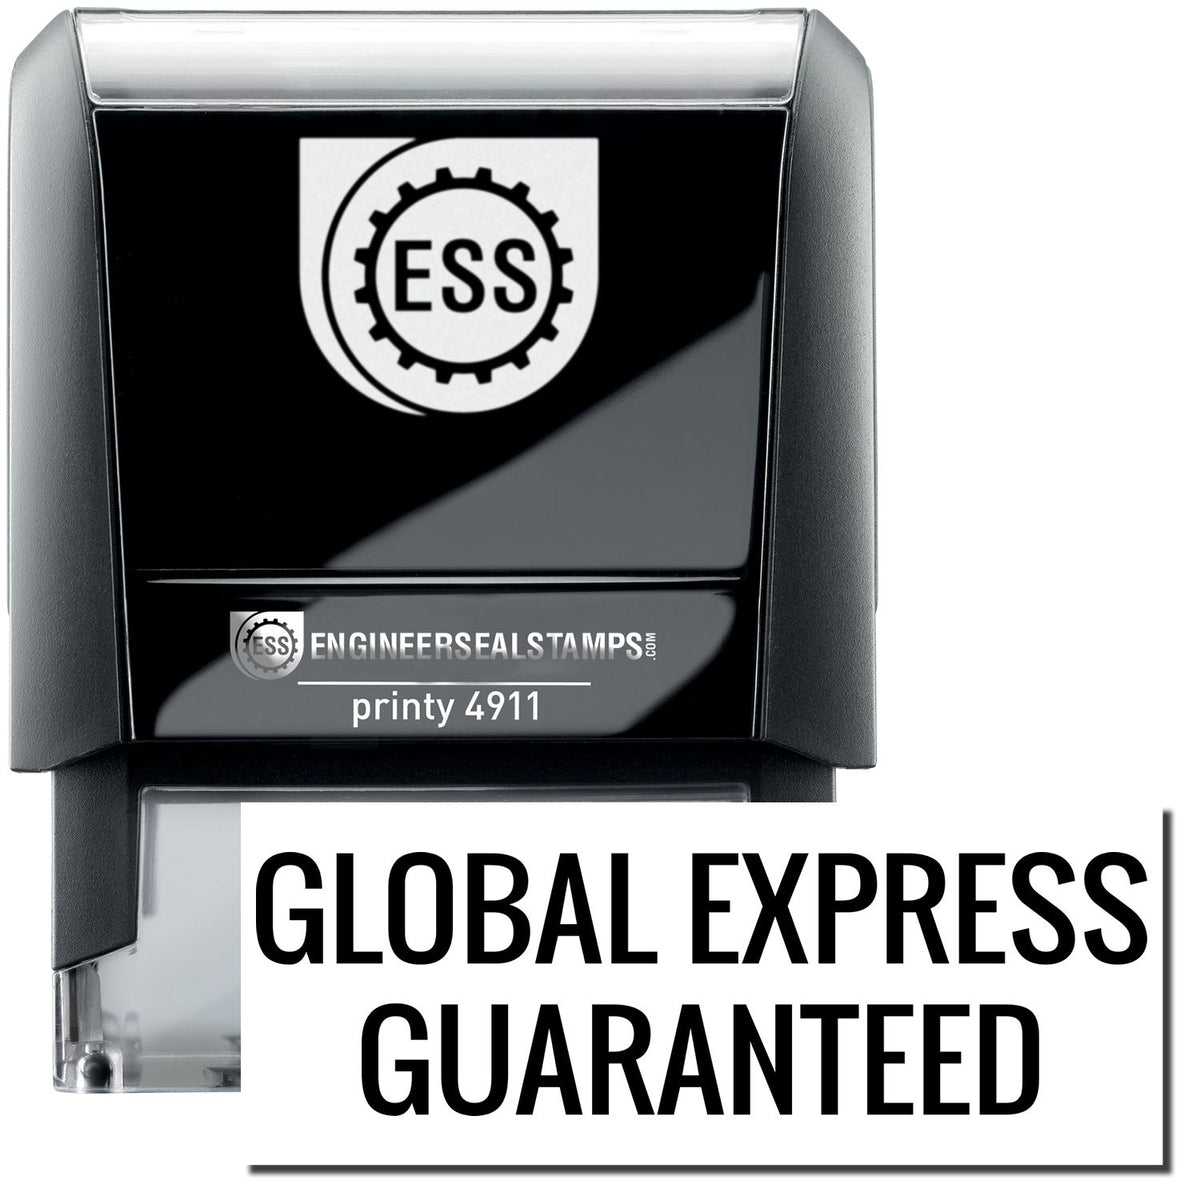 A self-inking stamp with a stamped image showing how the text &quot;GLOBAL EXPRESS GUARANTEED&quot; is displayed after stamping.